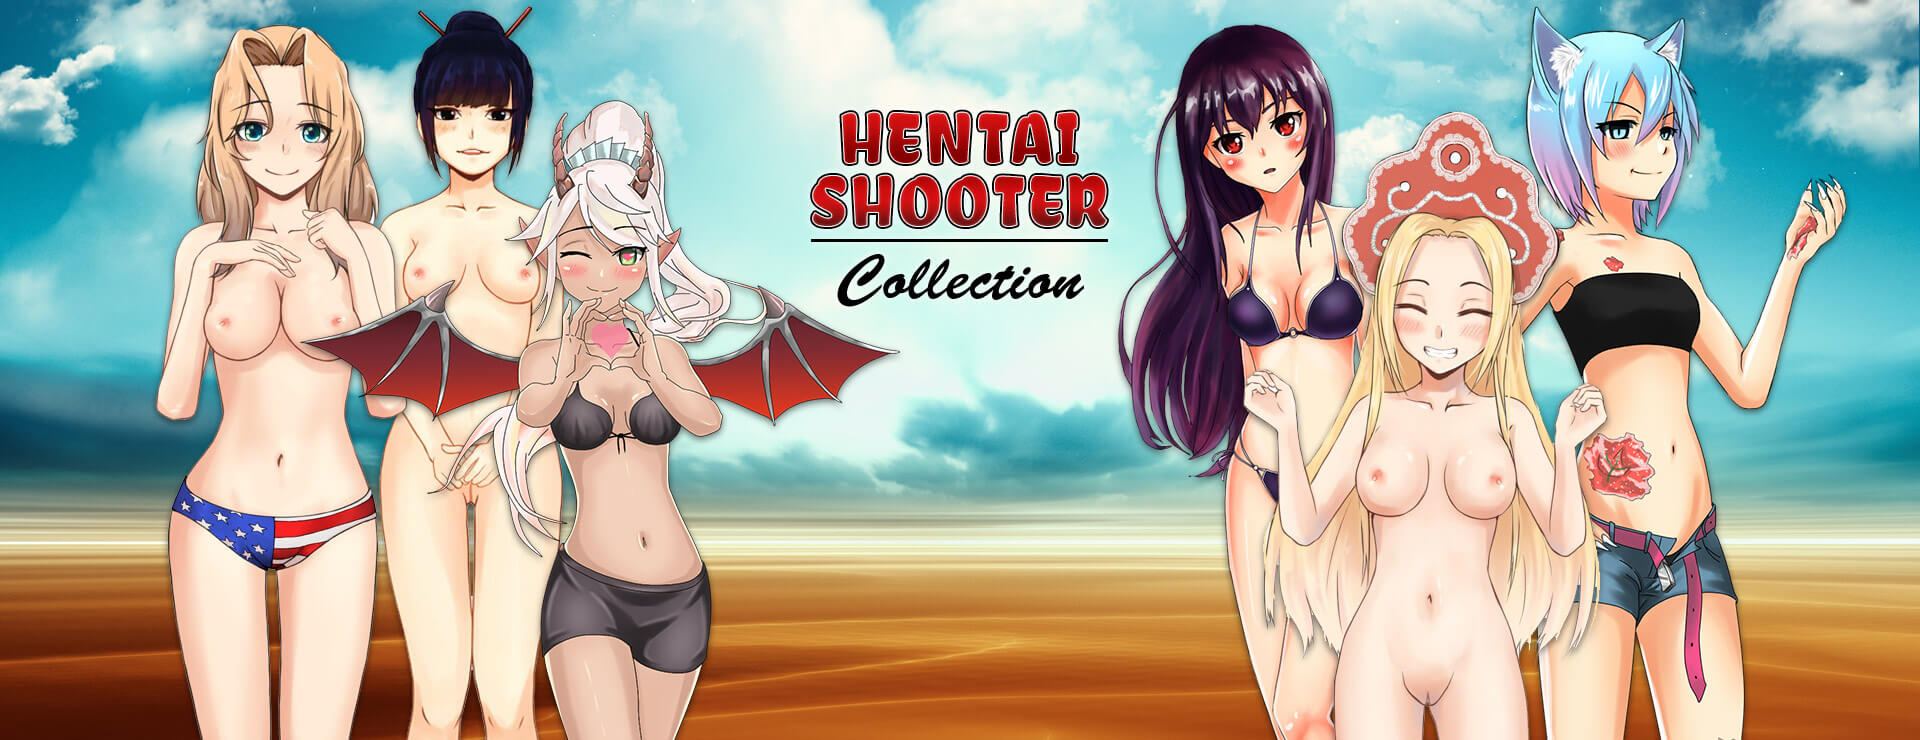 Hentai Shooter 3D - Complete Collection - Casual Juego